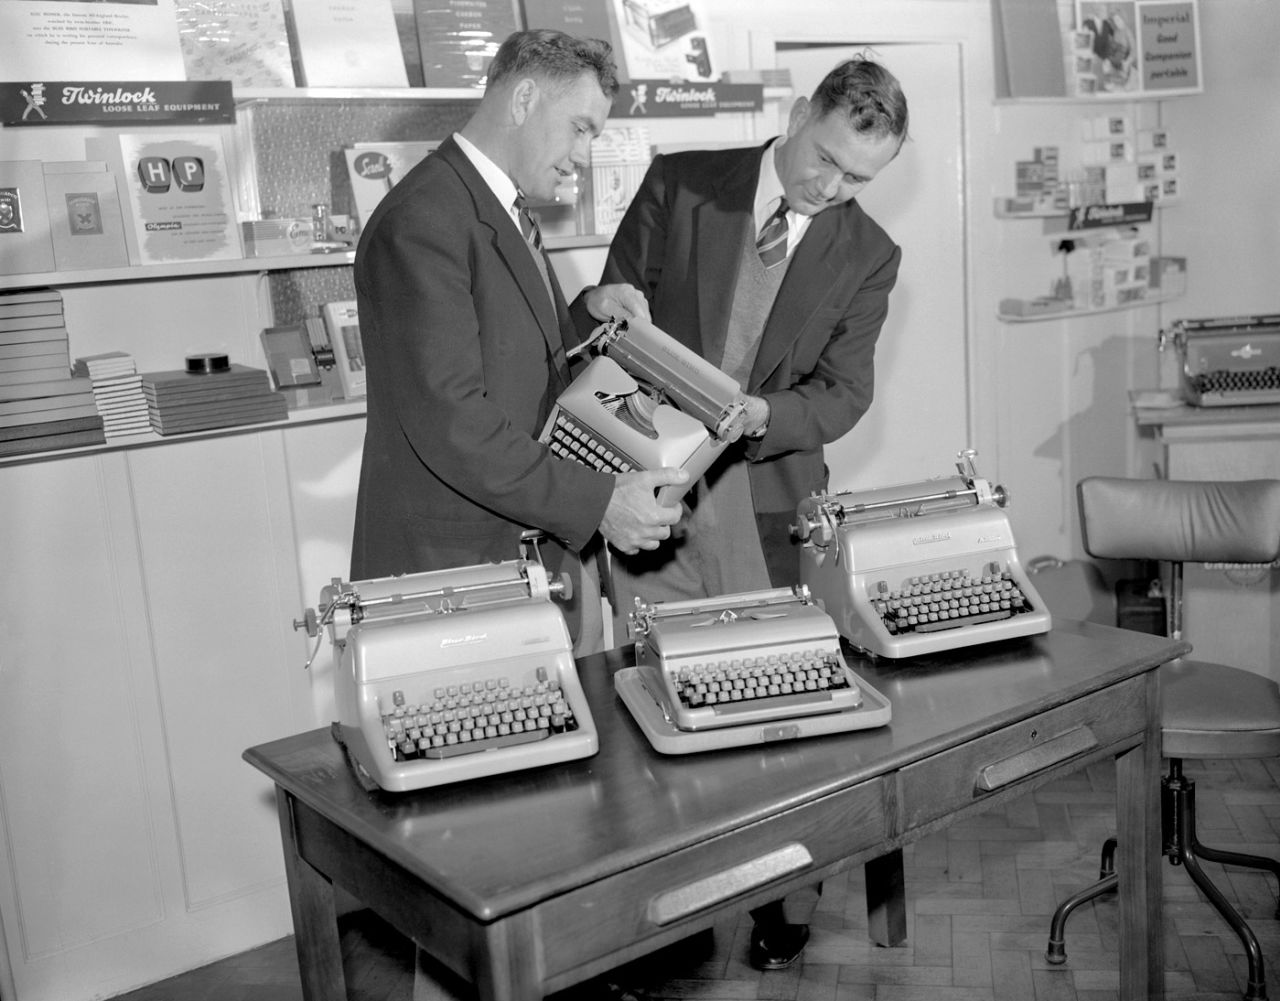 Alec (left) and Eric Bedser look at typewriters in their office equipment store in Woking, October 11, 1955